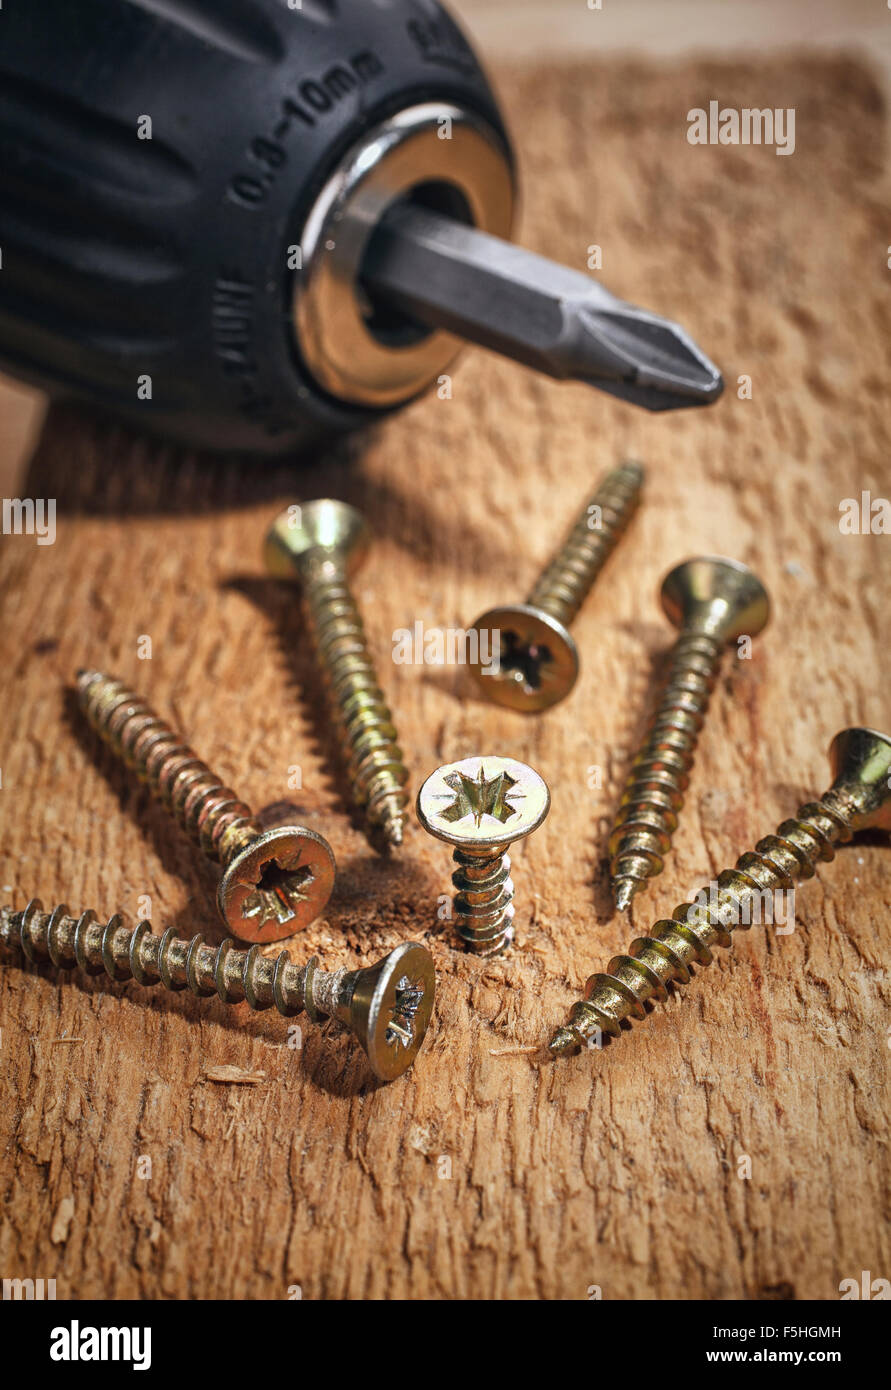 Electric drill and screws Stock Photo